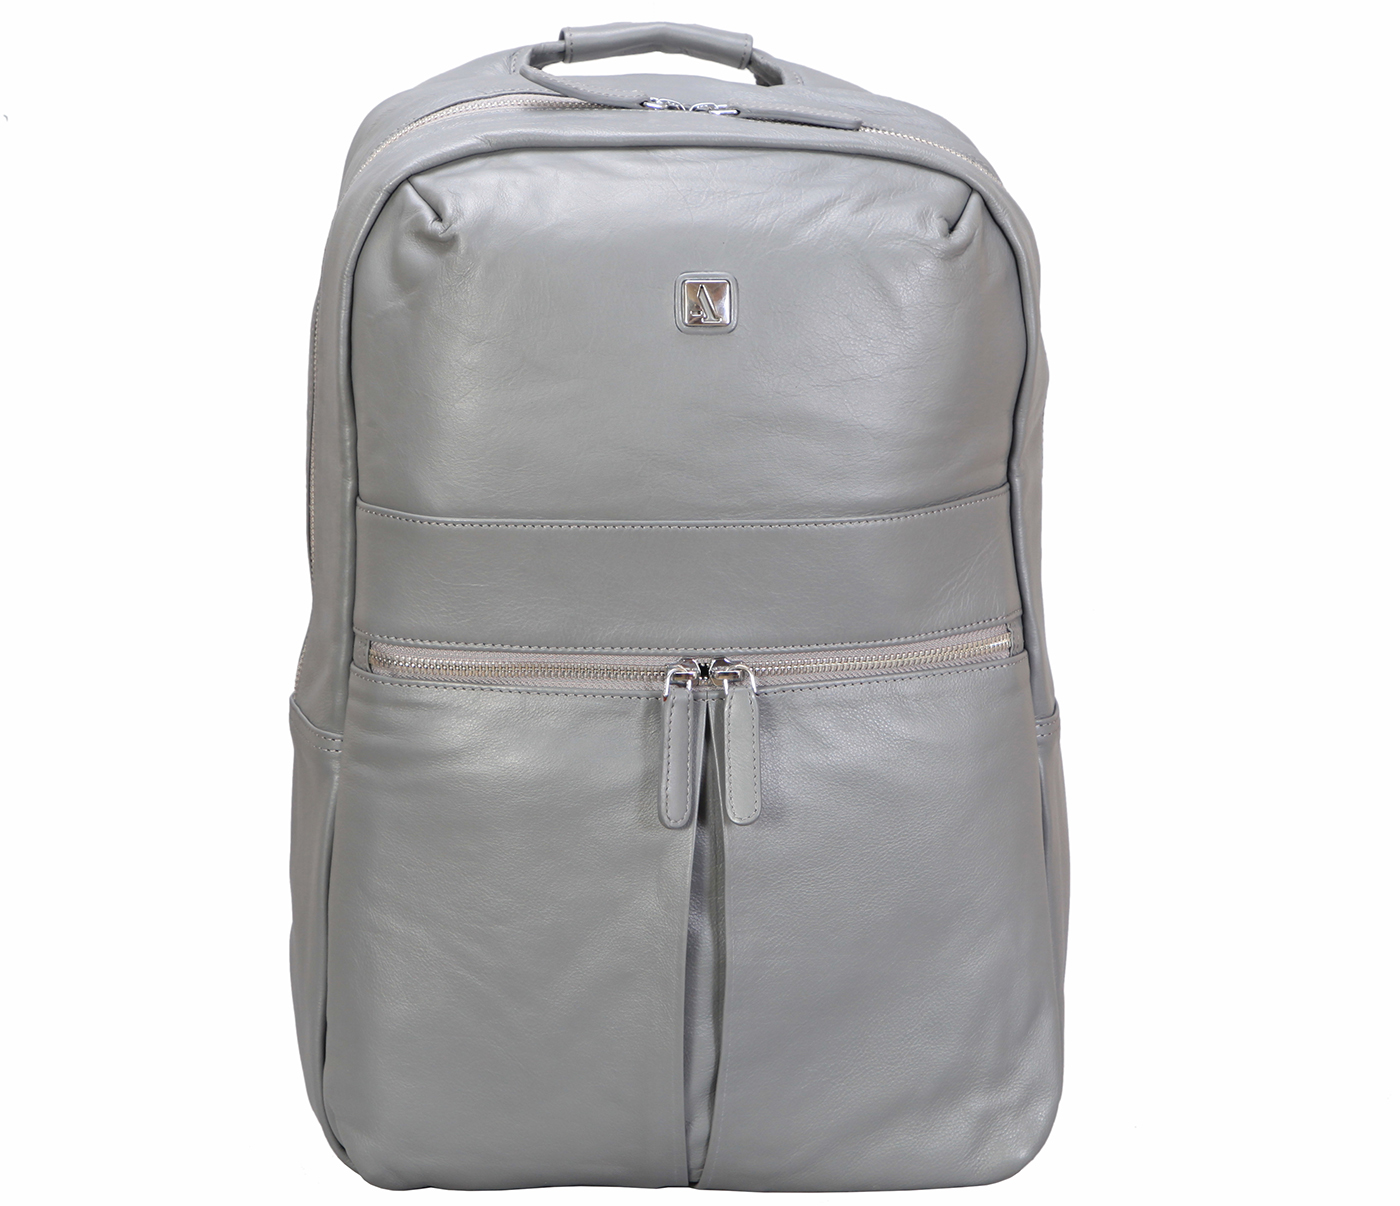 LC40-Charles-Unisex backpack for laptop bag in Genuine Leather  - Grey